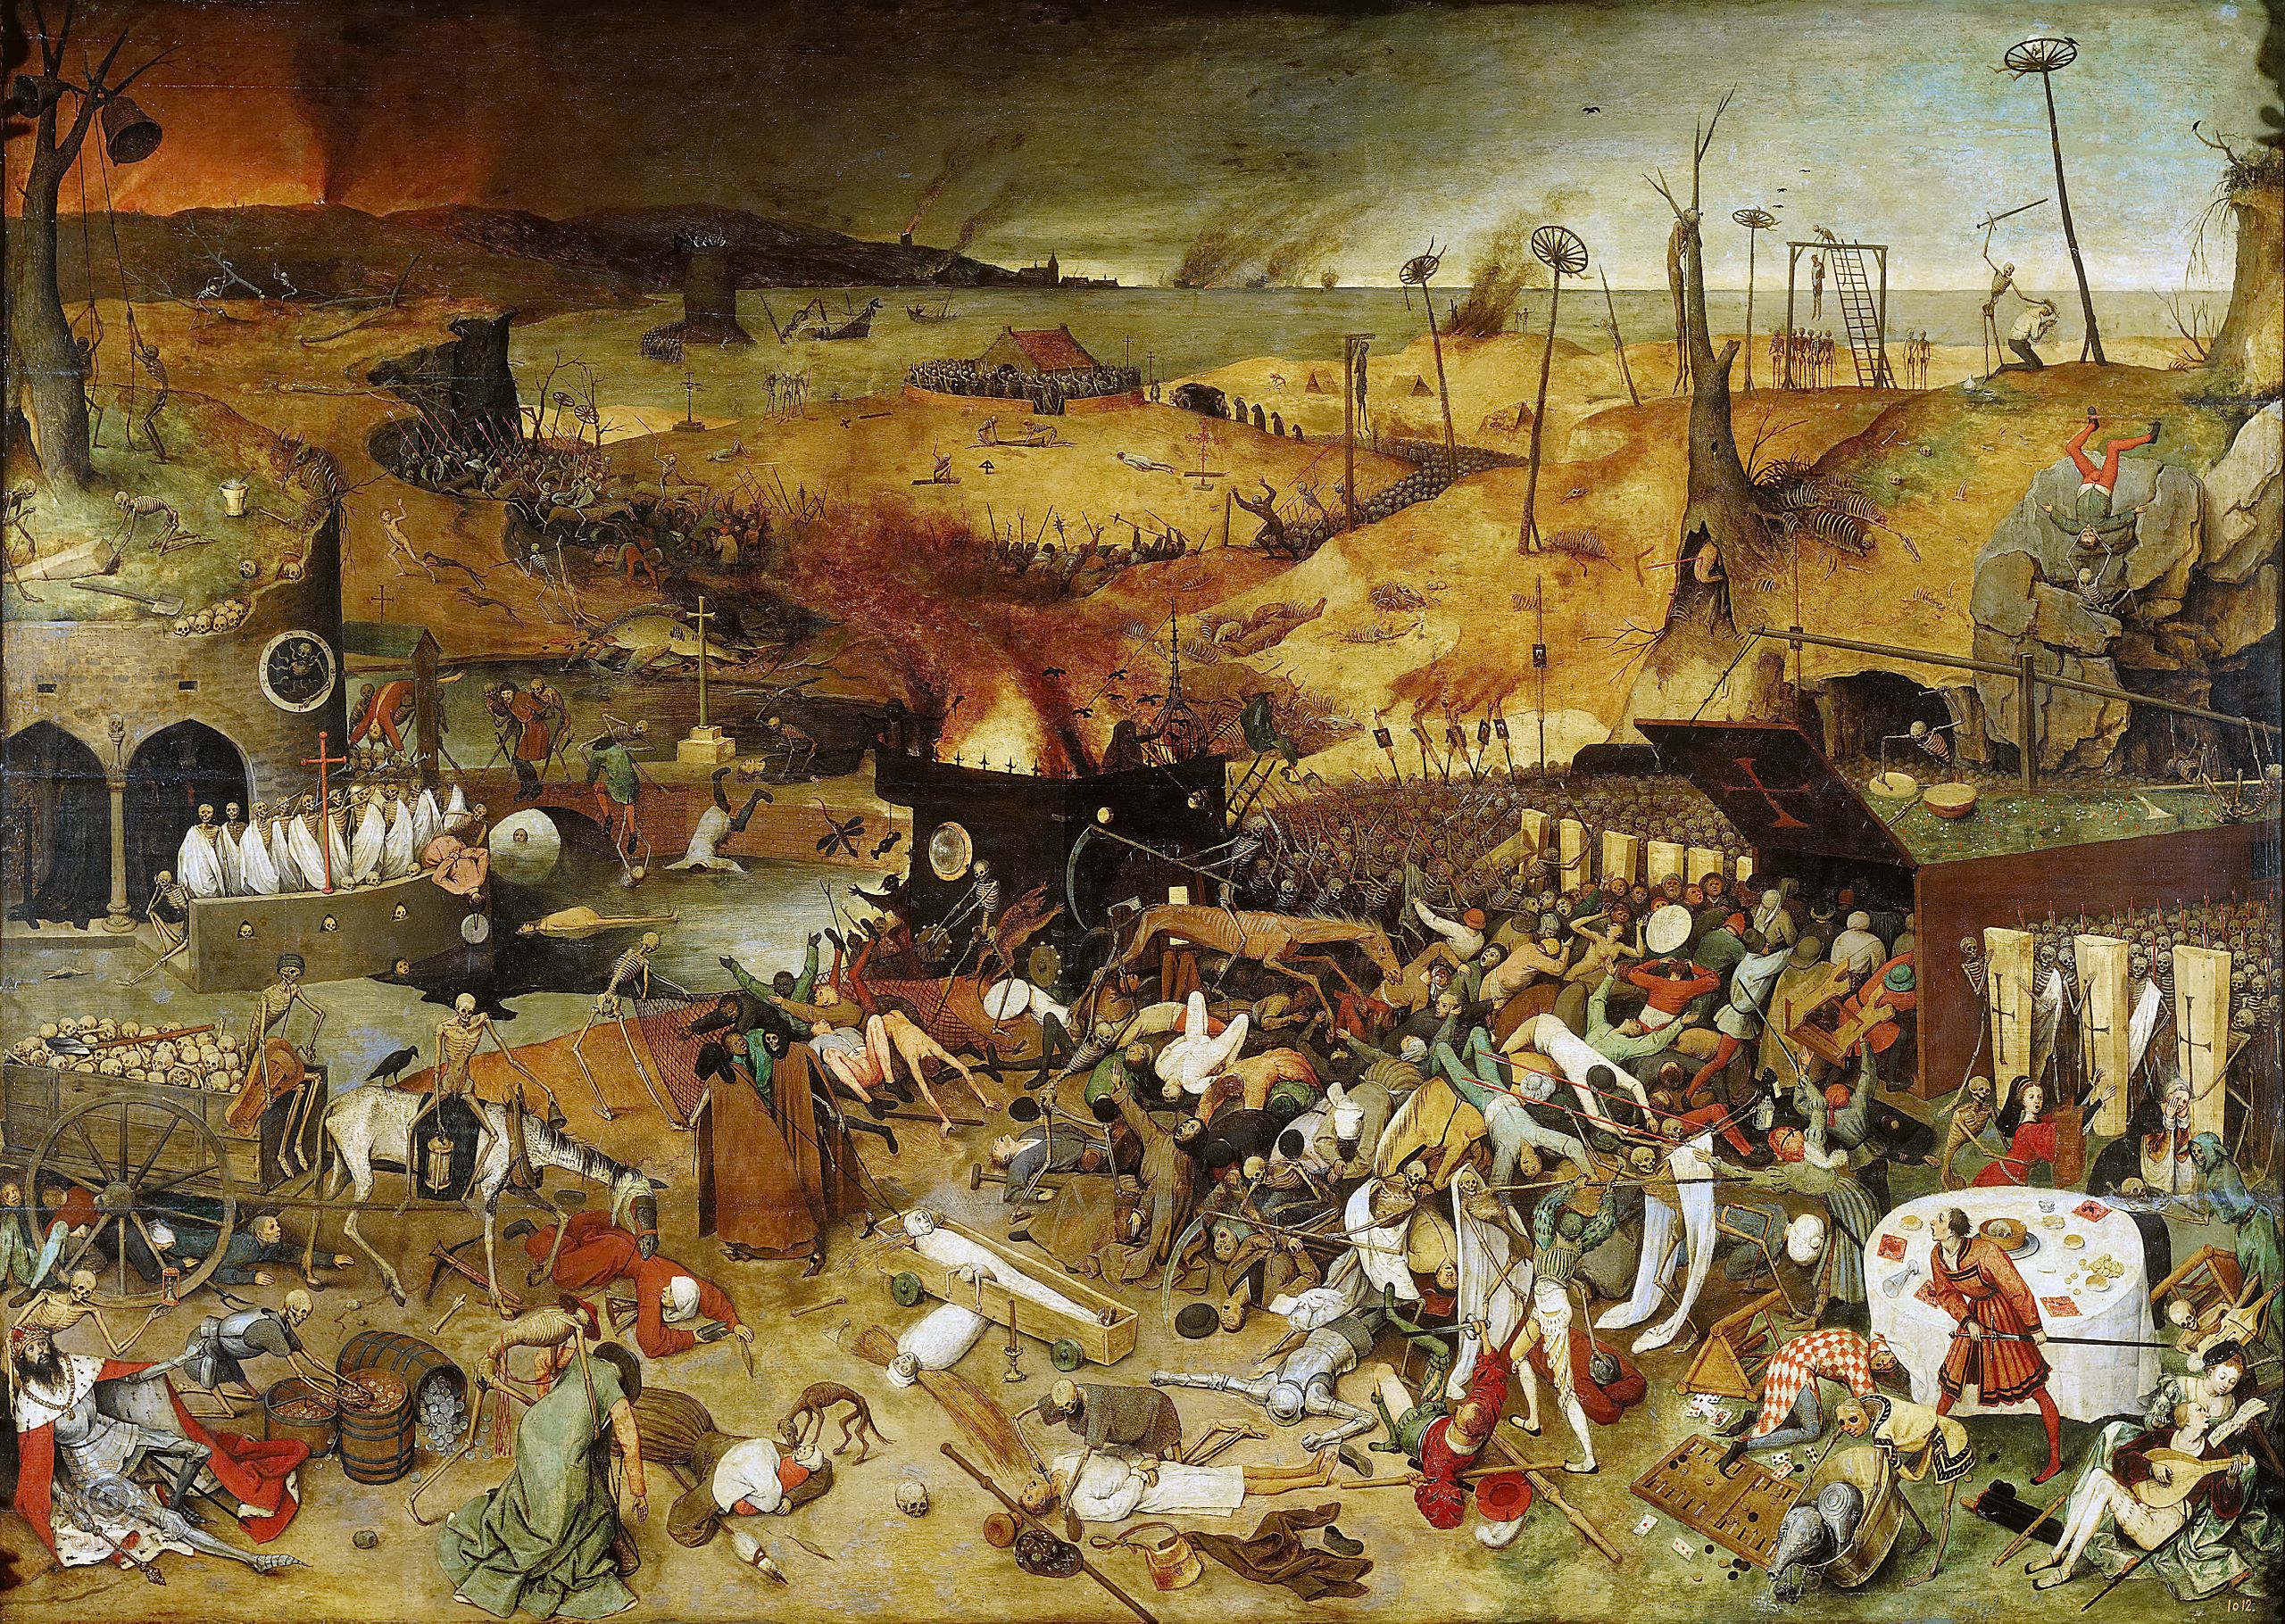 Humans, Not Rats, May Have Been Responsible For Spreading The Black Death